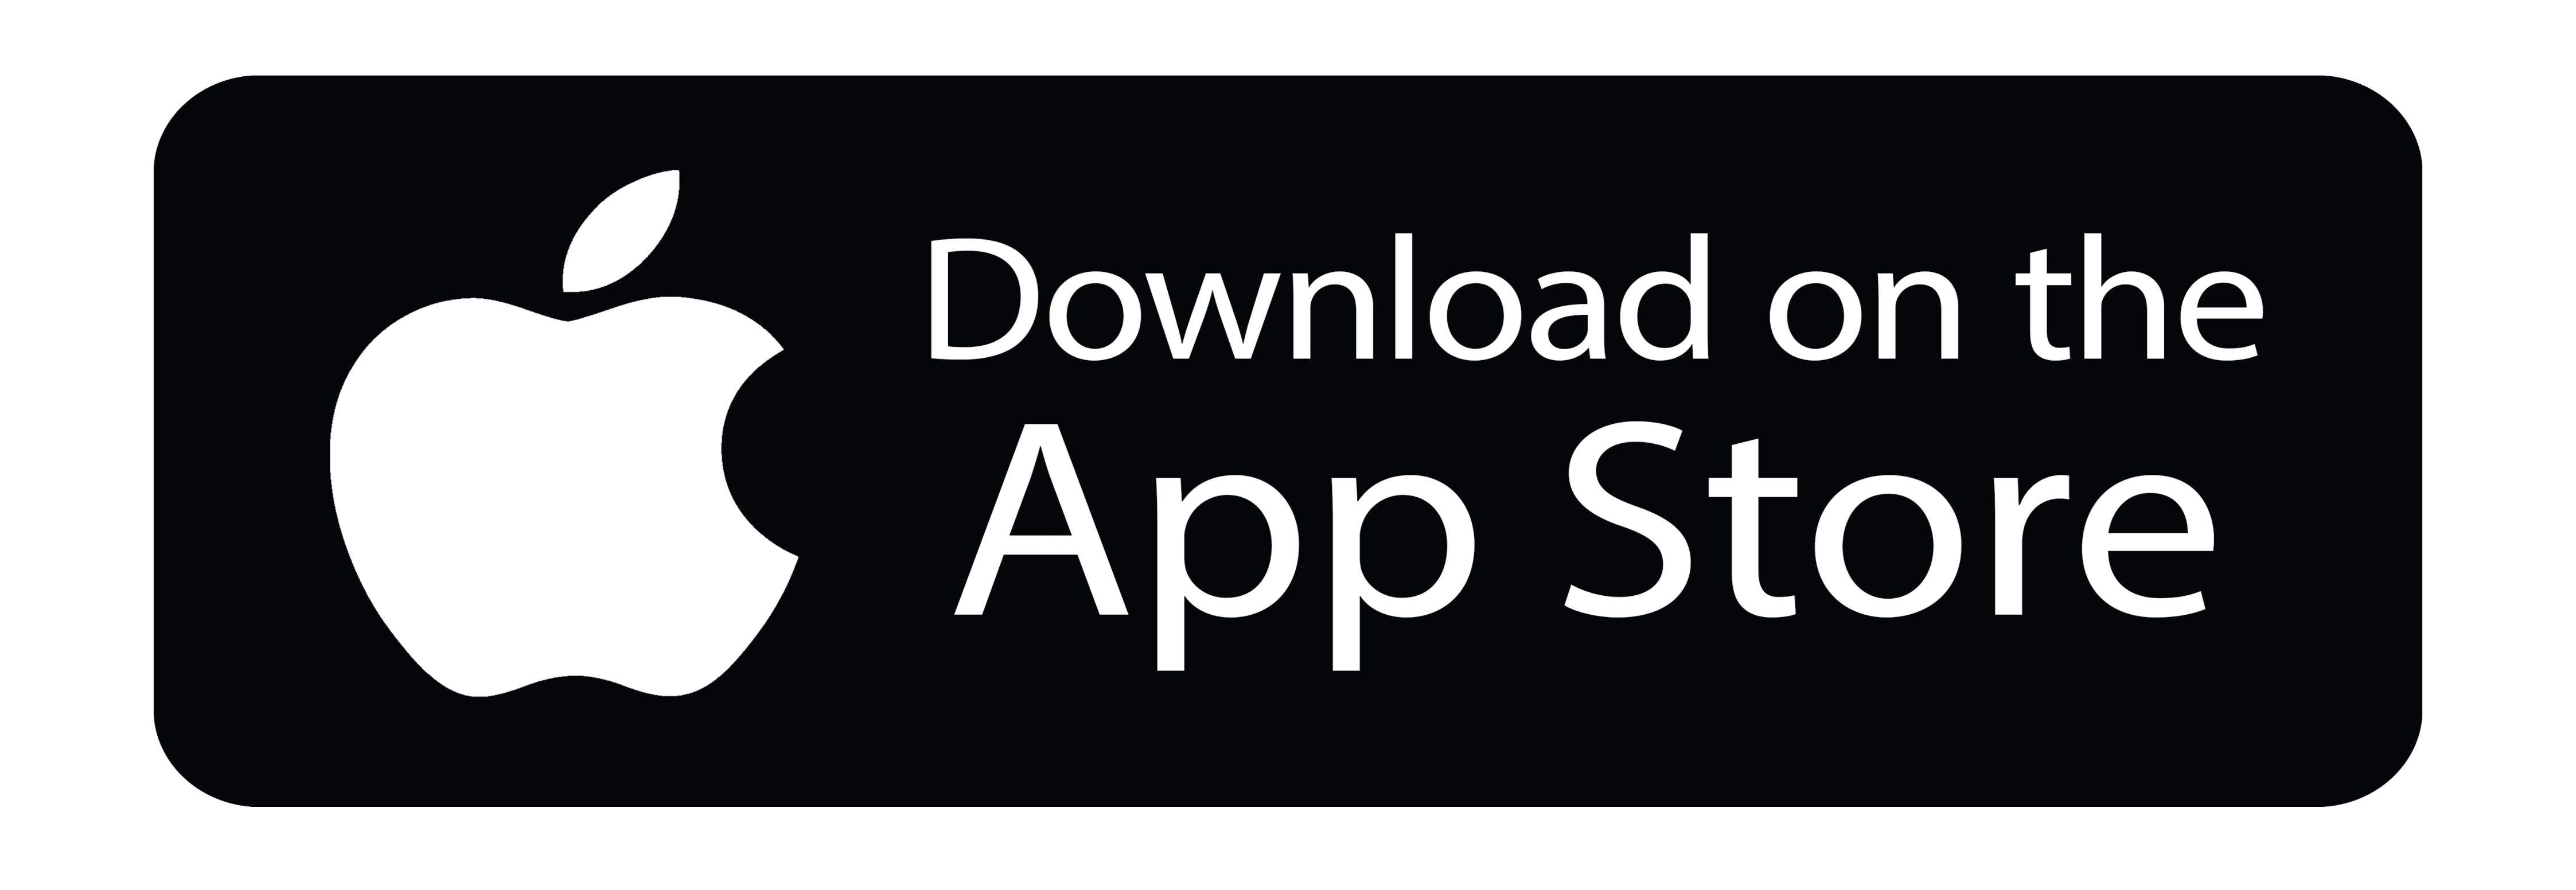 Download the app on app store